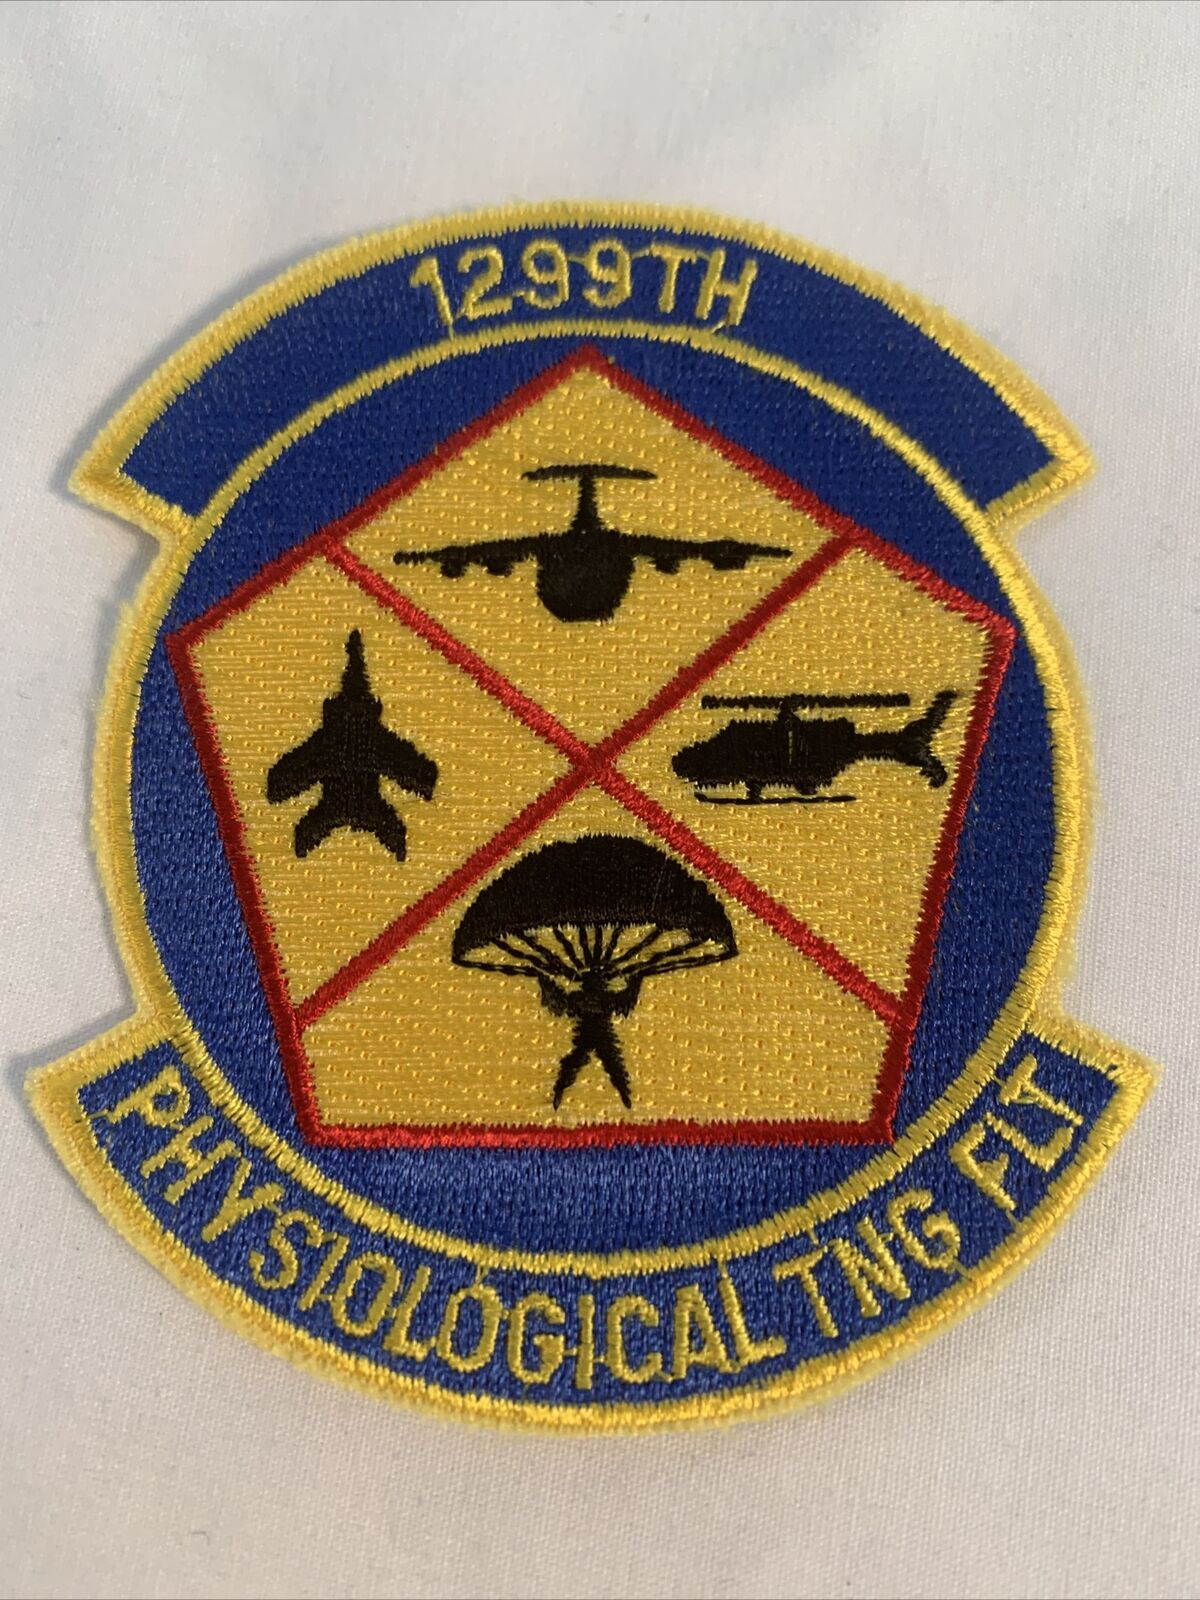 USAF Air Force 1299th Physiological Training Flight Patch